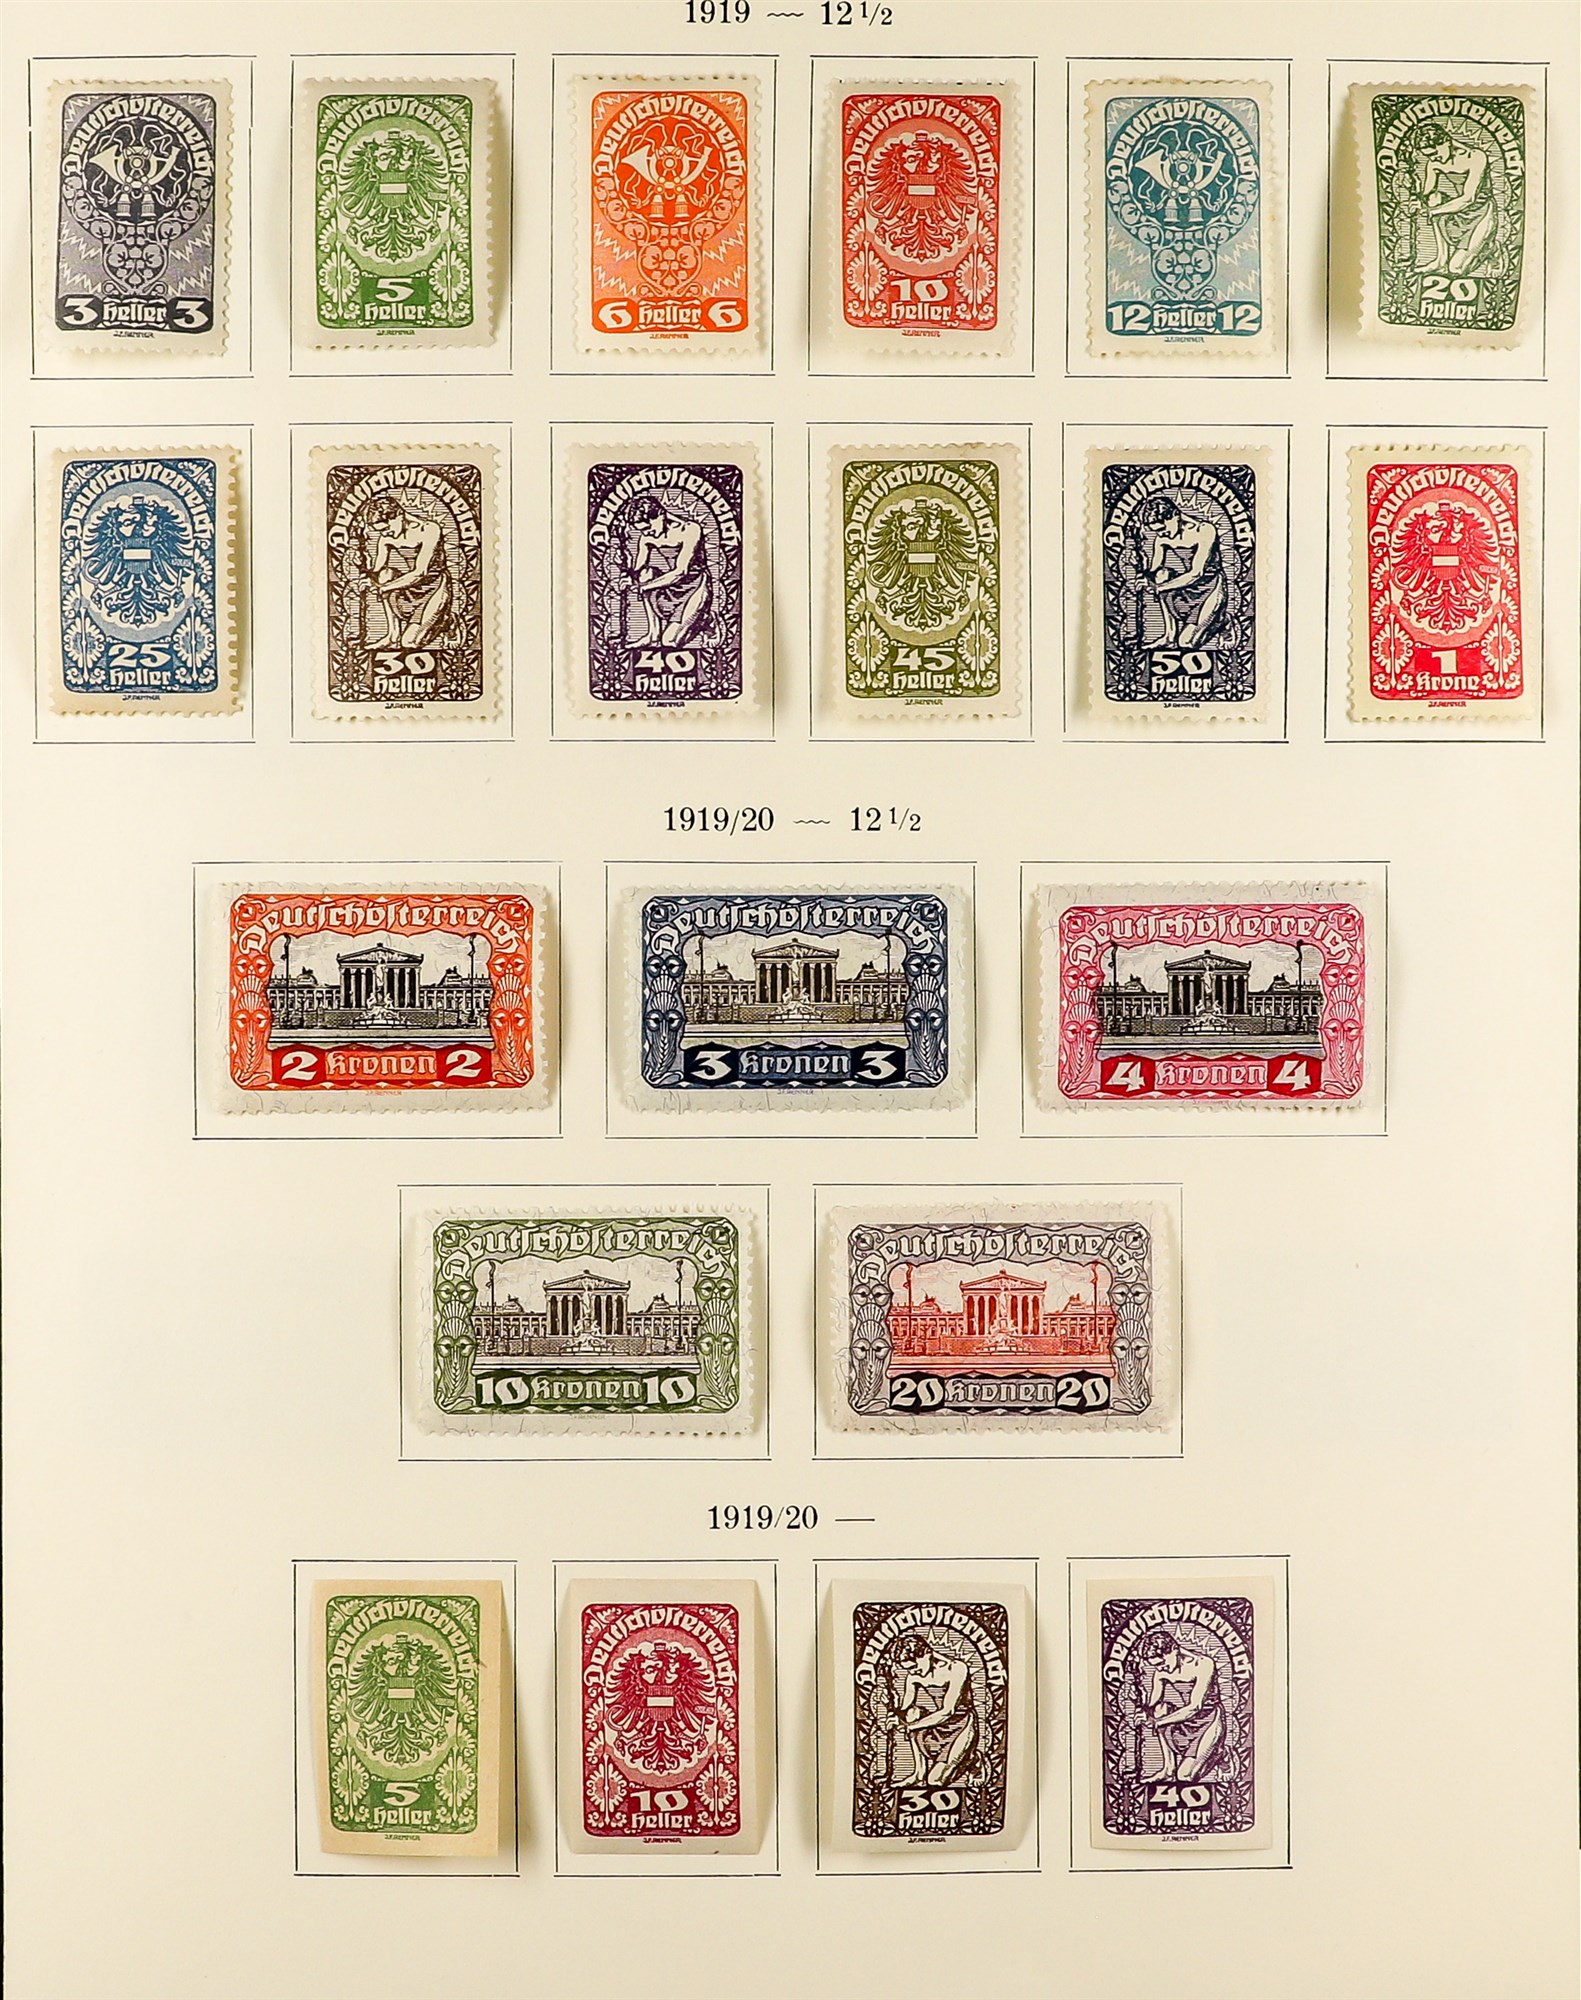 AUSTRIA 1918 - 1937 REPUBLIC COLLECTION of chiefly mint / never hinged mint sets in album incl - Image 3 of 22